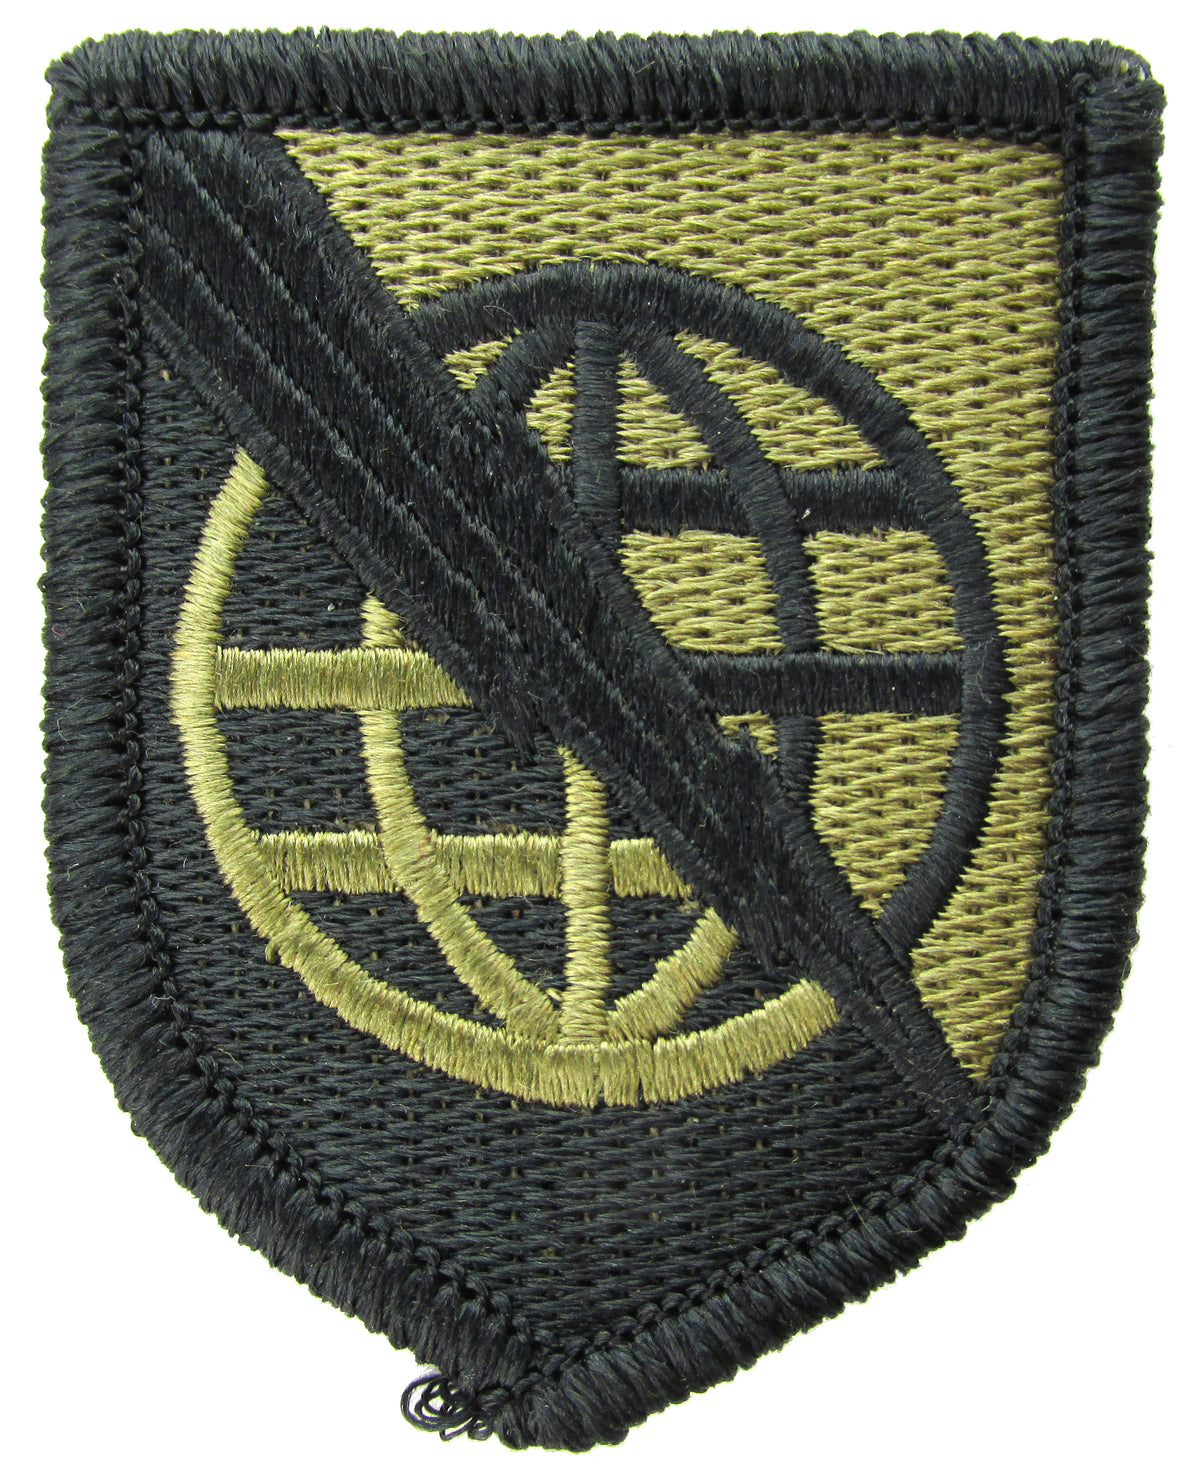 Information Systems Command OCP Patch - U.S. Army